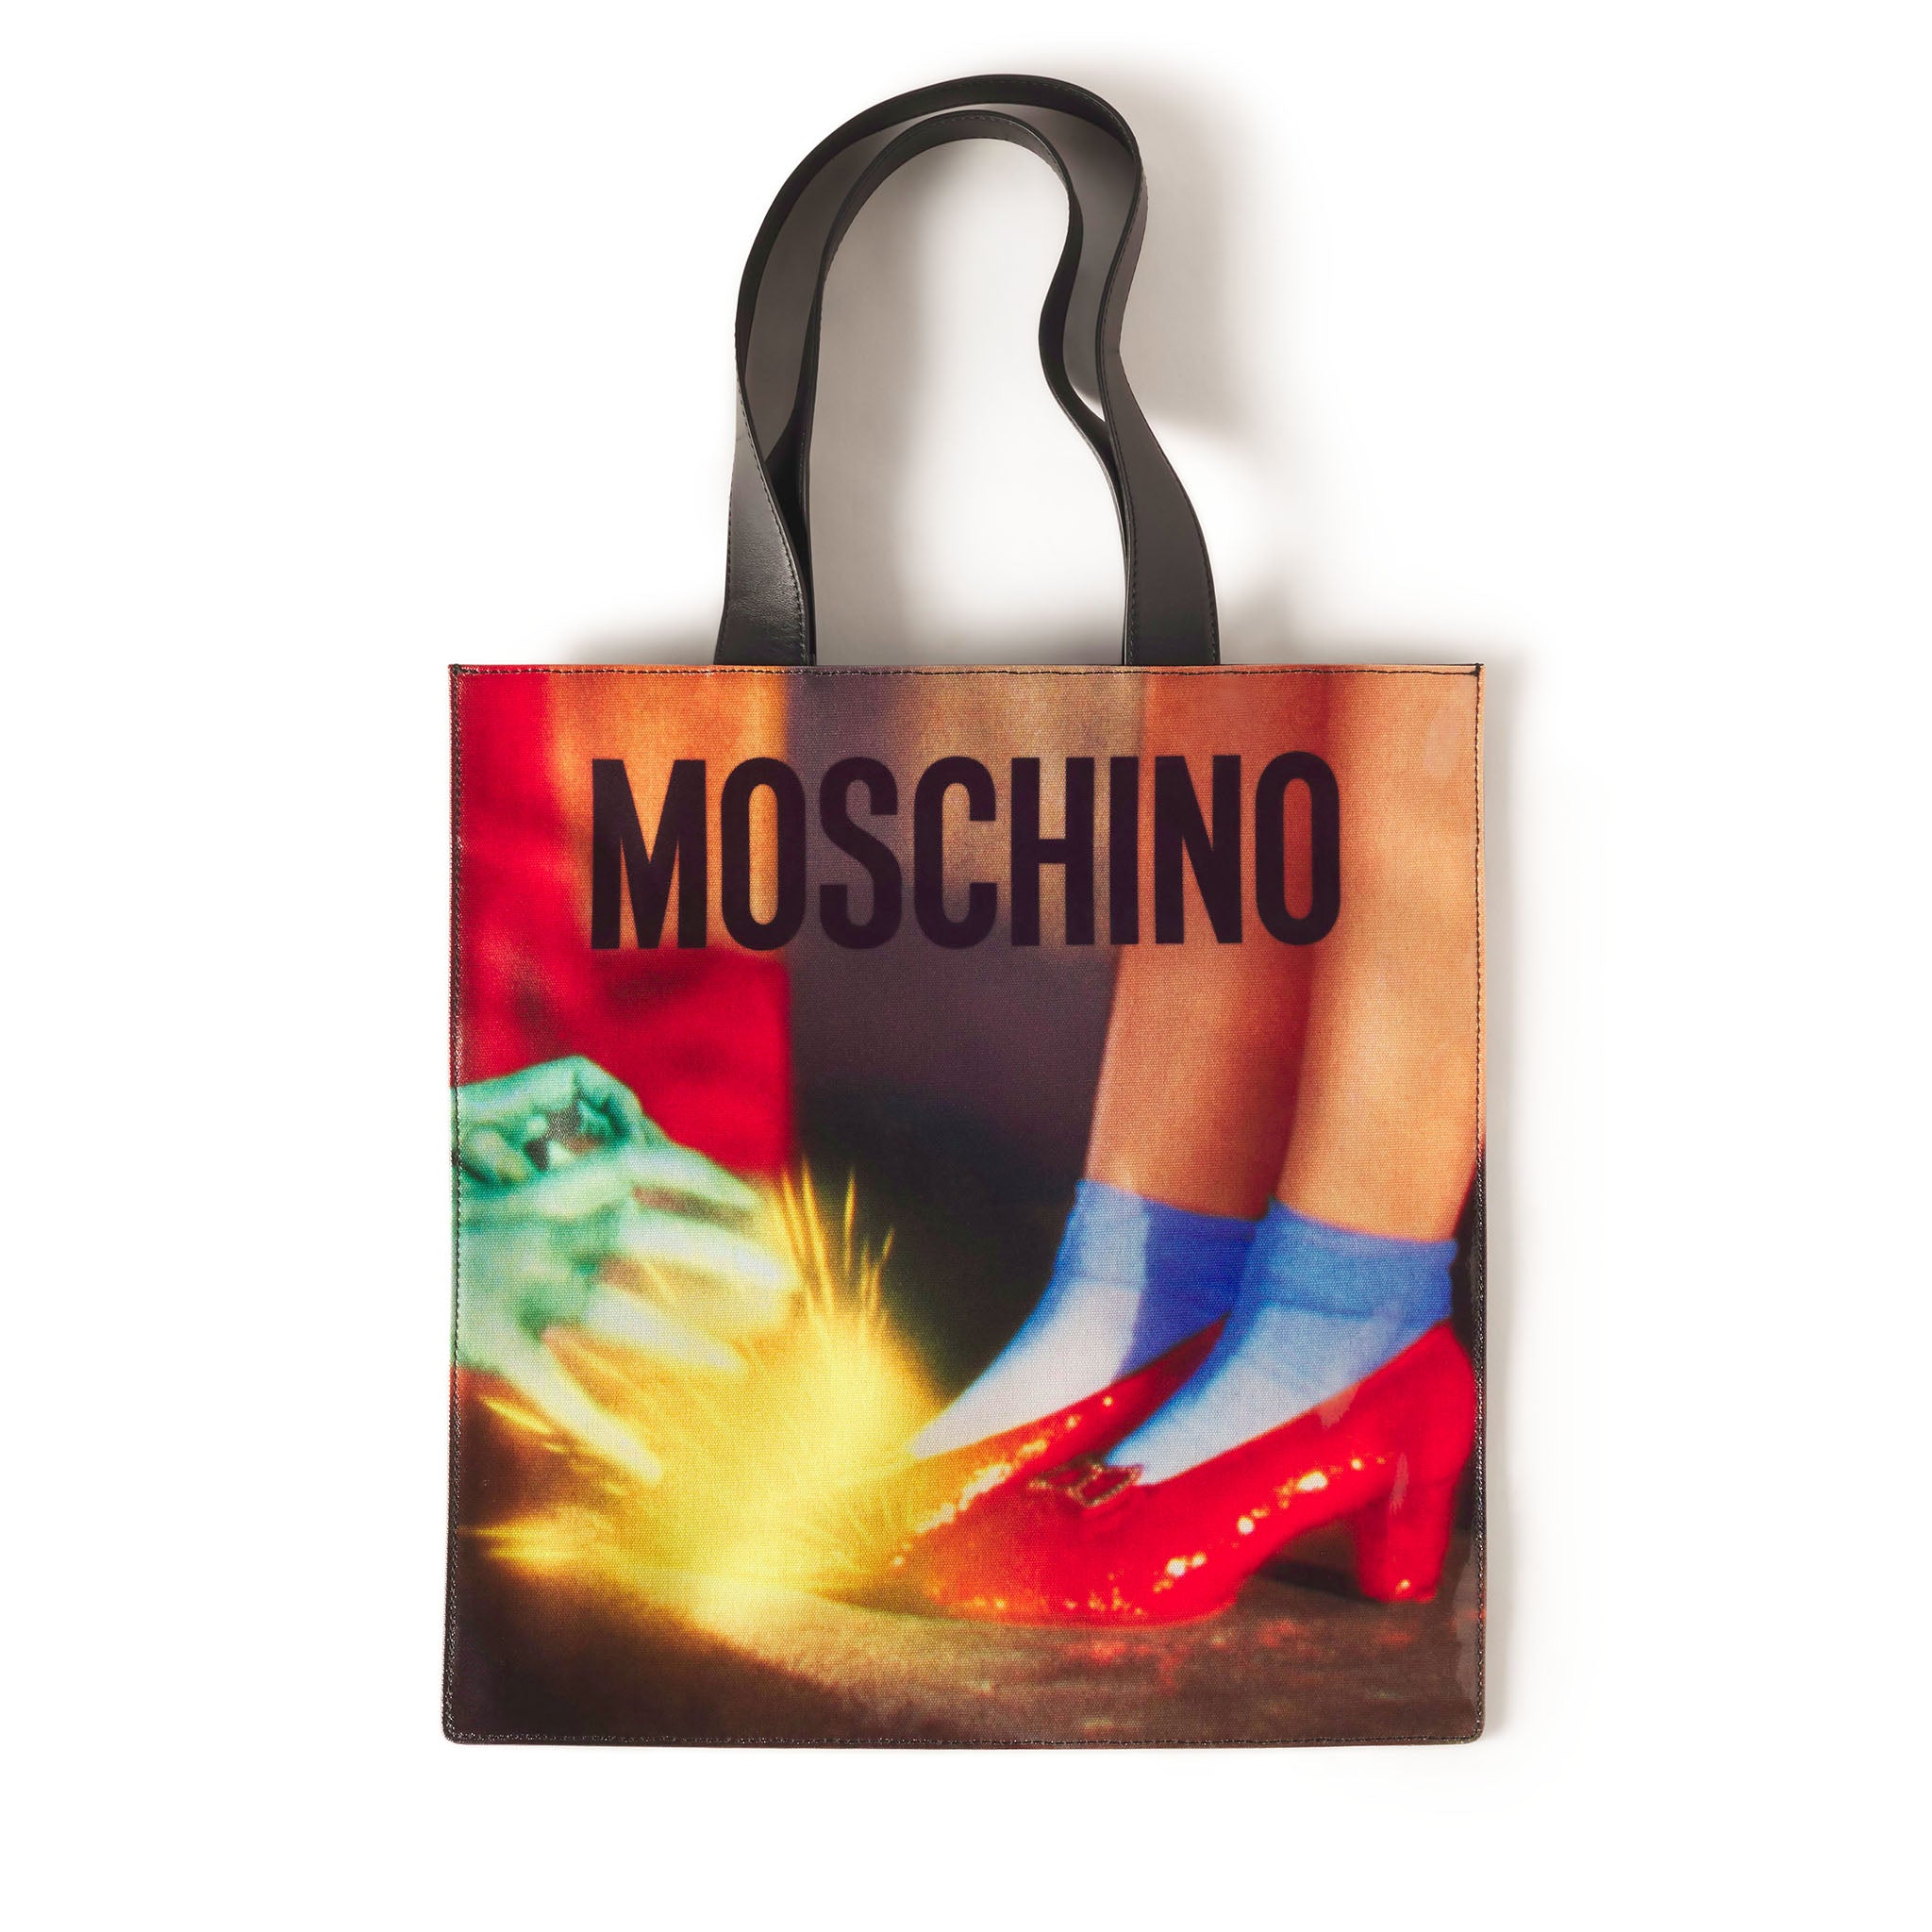 Moschino Handbag for sale in Co. Kerry for €40 on DoneDeal